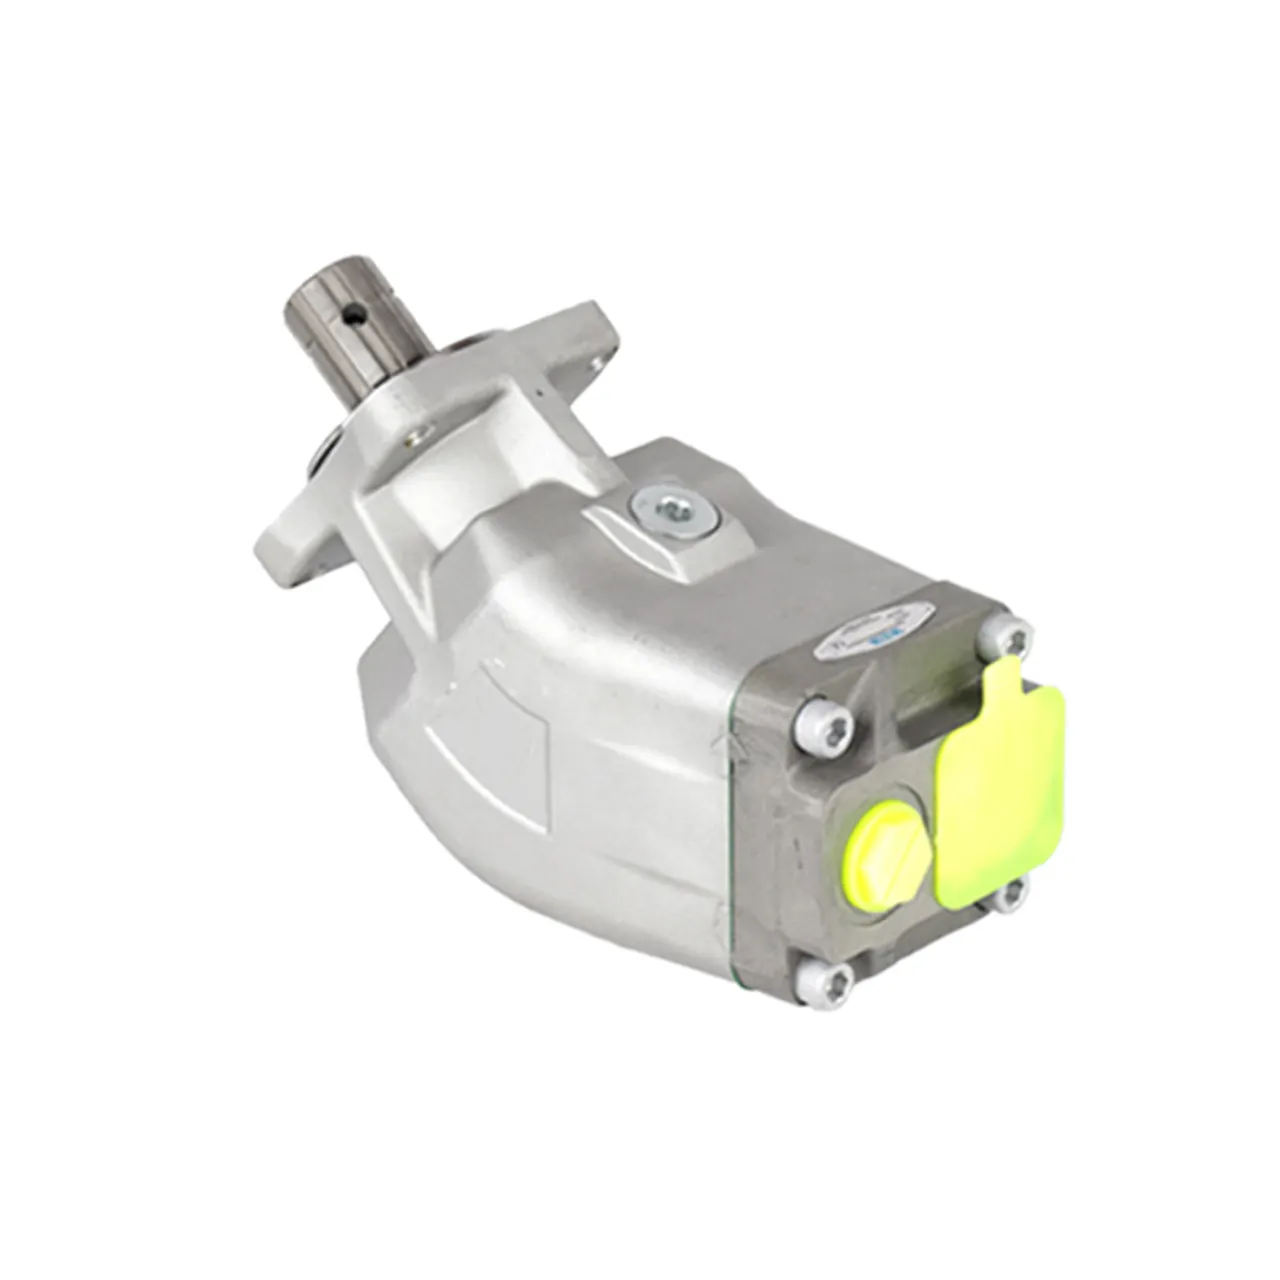 High Quality ISO Connection Bent-Axis Cast Iron Body 35 LT Hydraulic Piston Pump For Wide Range Hydraulic Applications